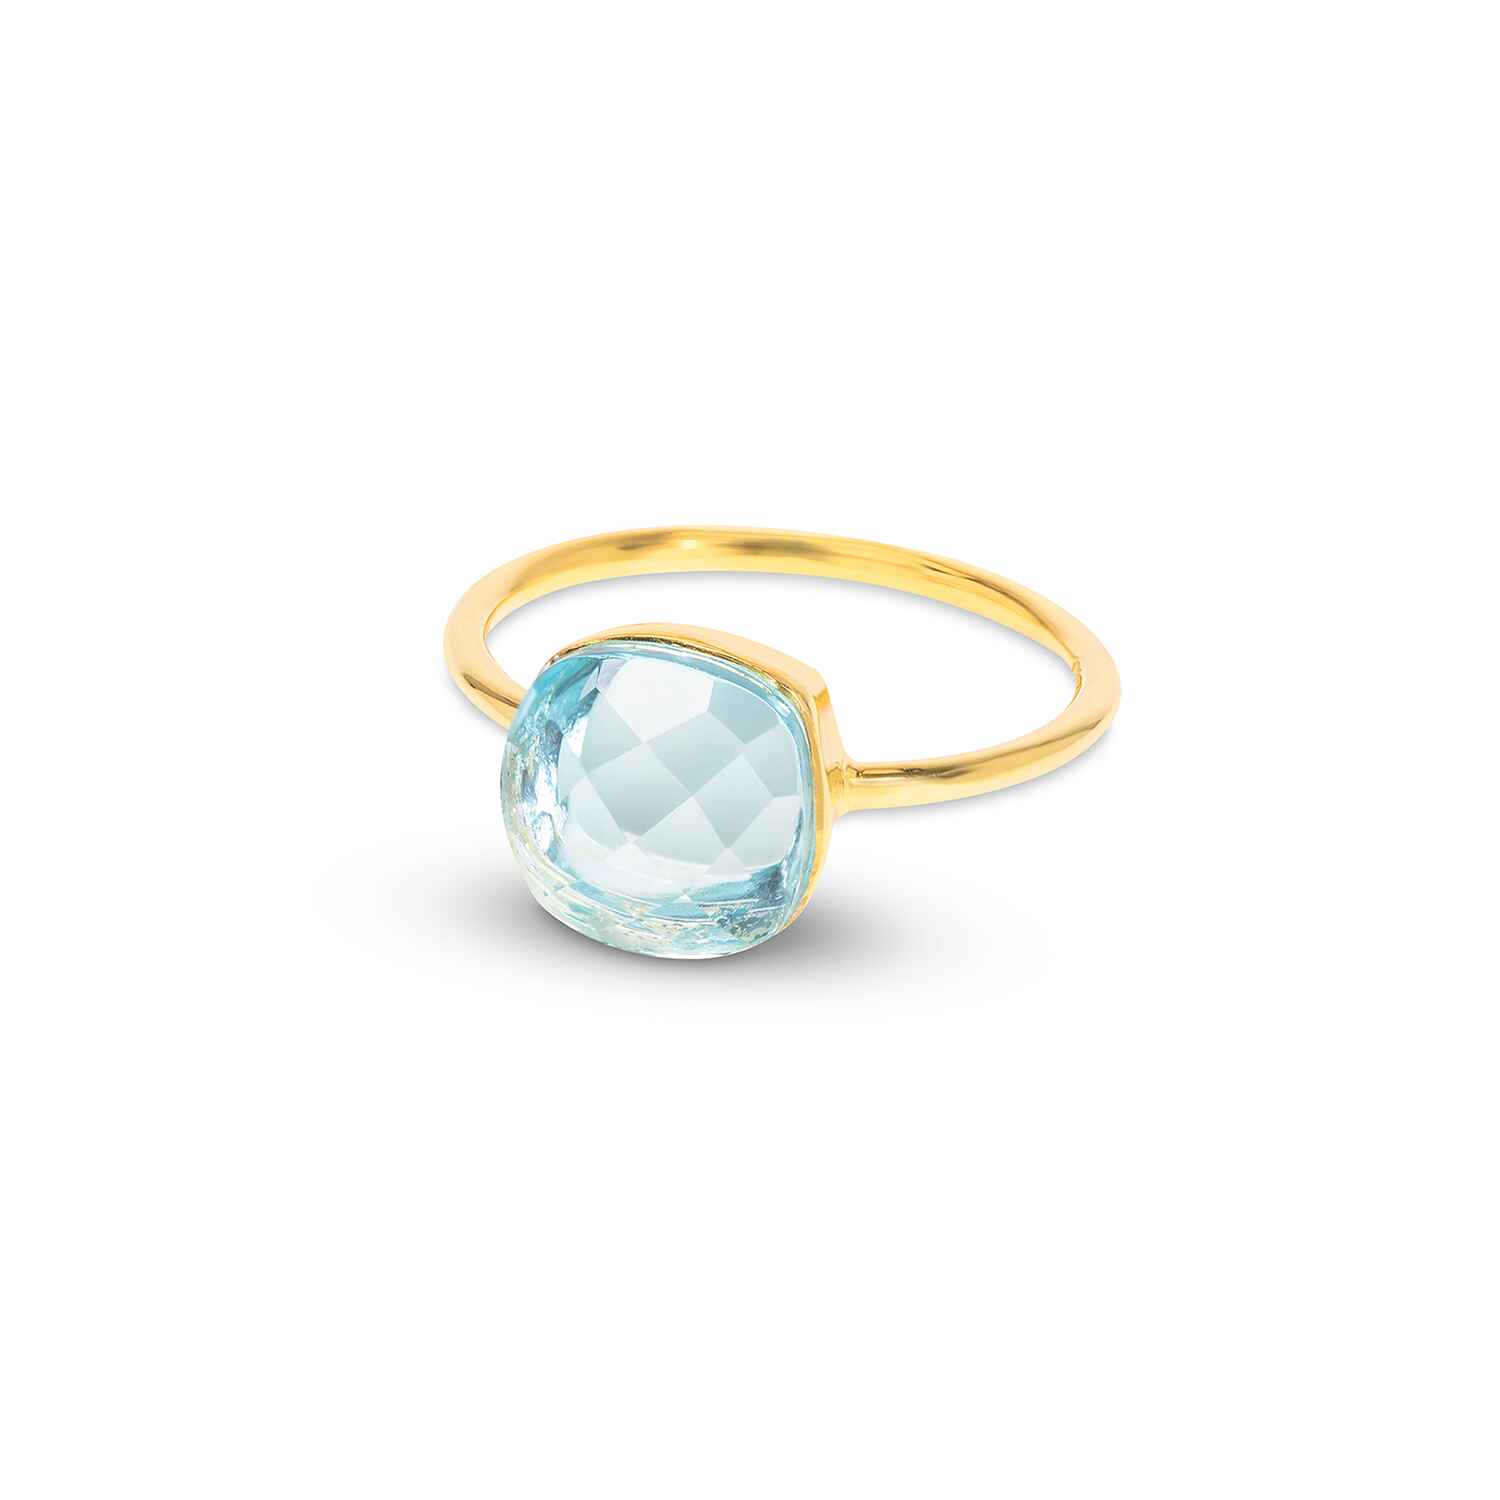 The Sophia Blue Topaz Gold Ring is embellished with a raised and faceted vintage gemstone. This sustainable jewellery piece is best paired with the same style ring with different gemstones.